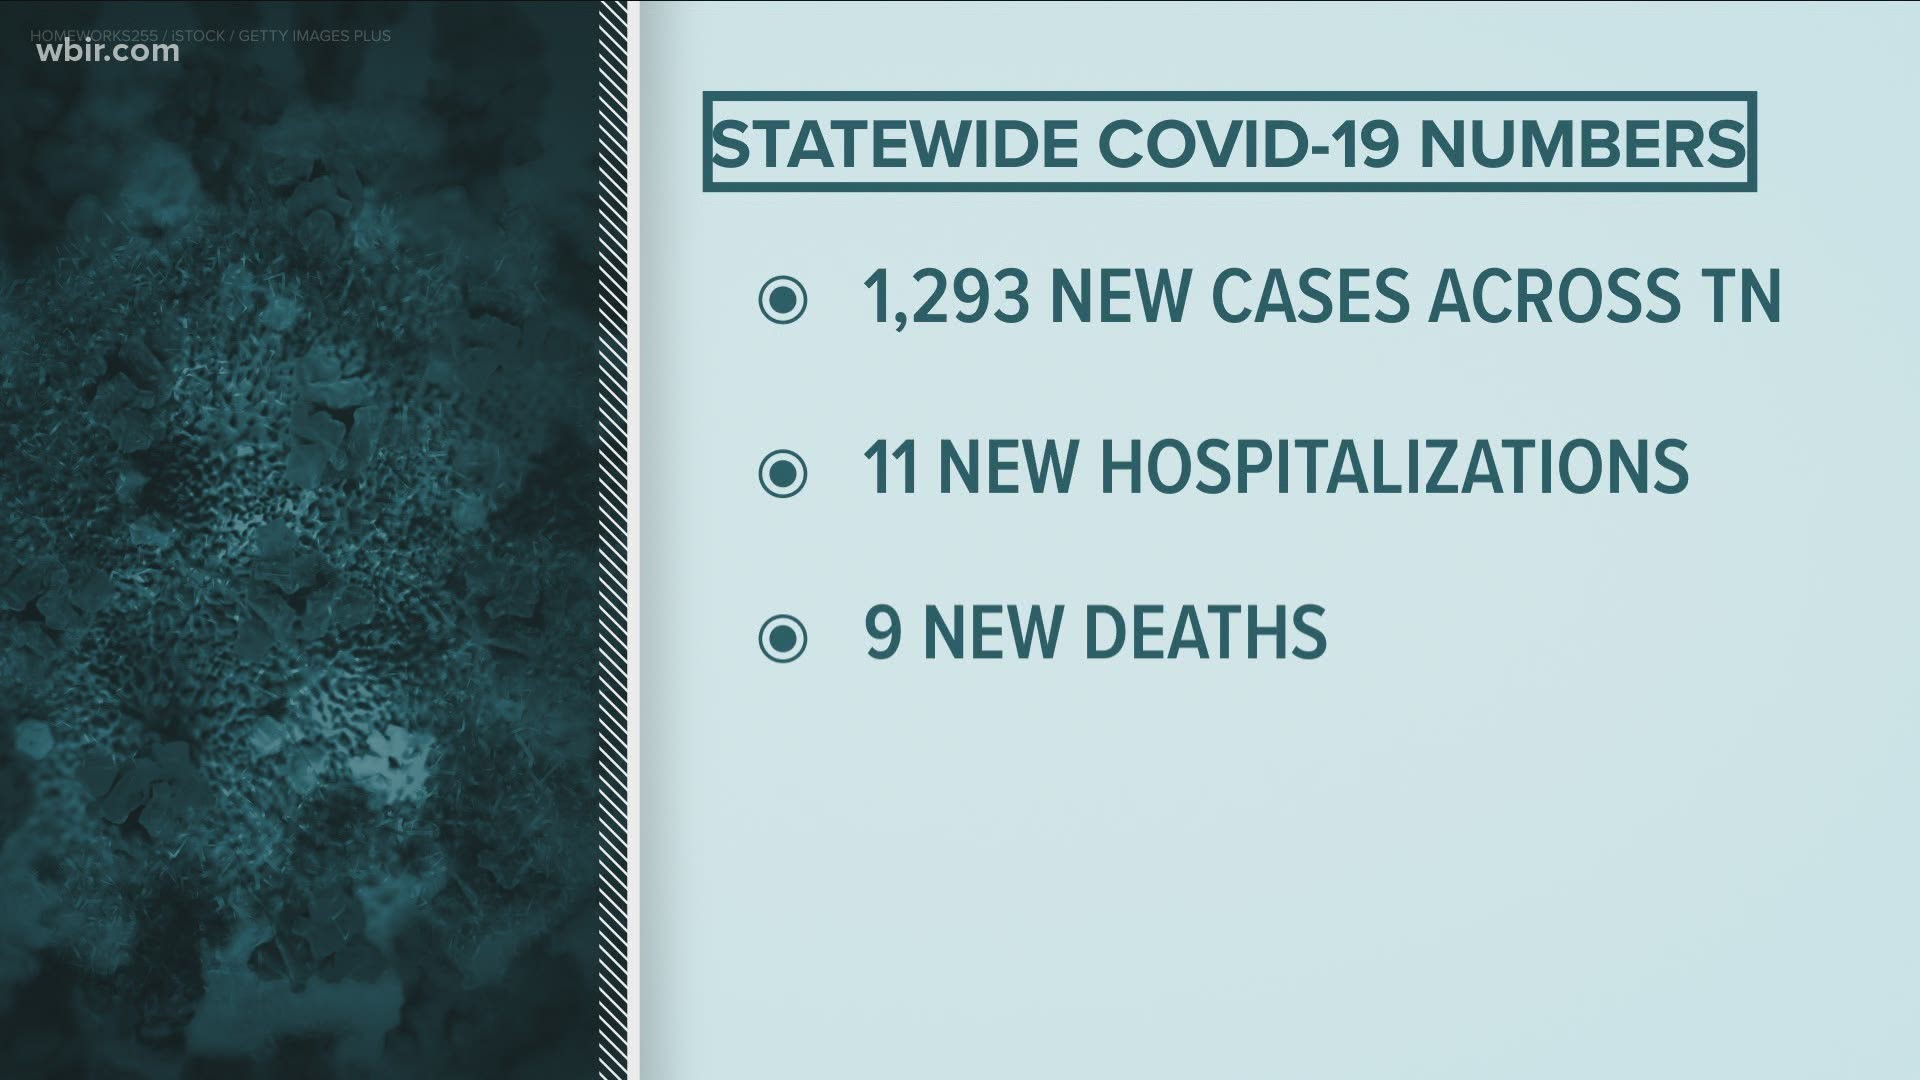 The state of Tennessee reports 1,293 new confirmed cases bringing the total to more than 51,000.